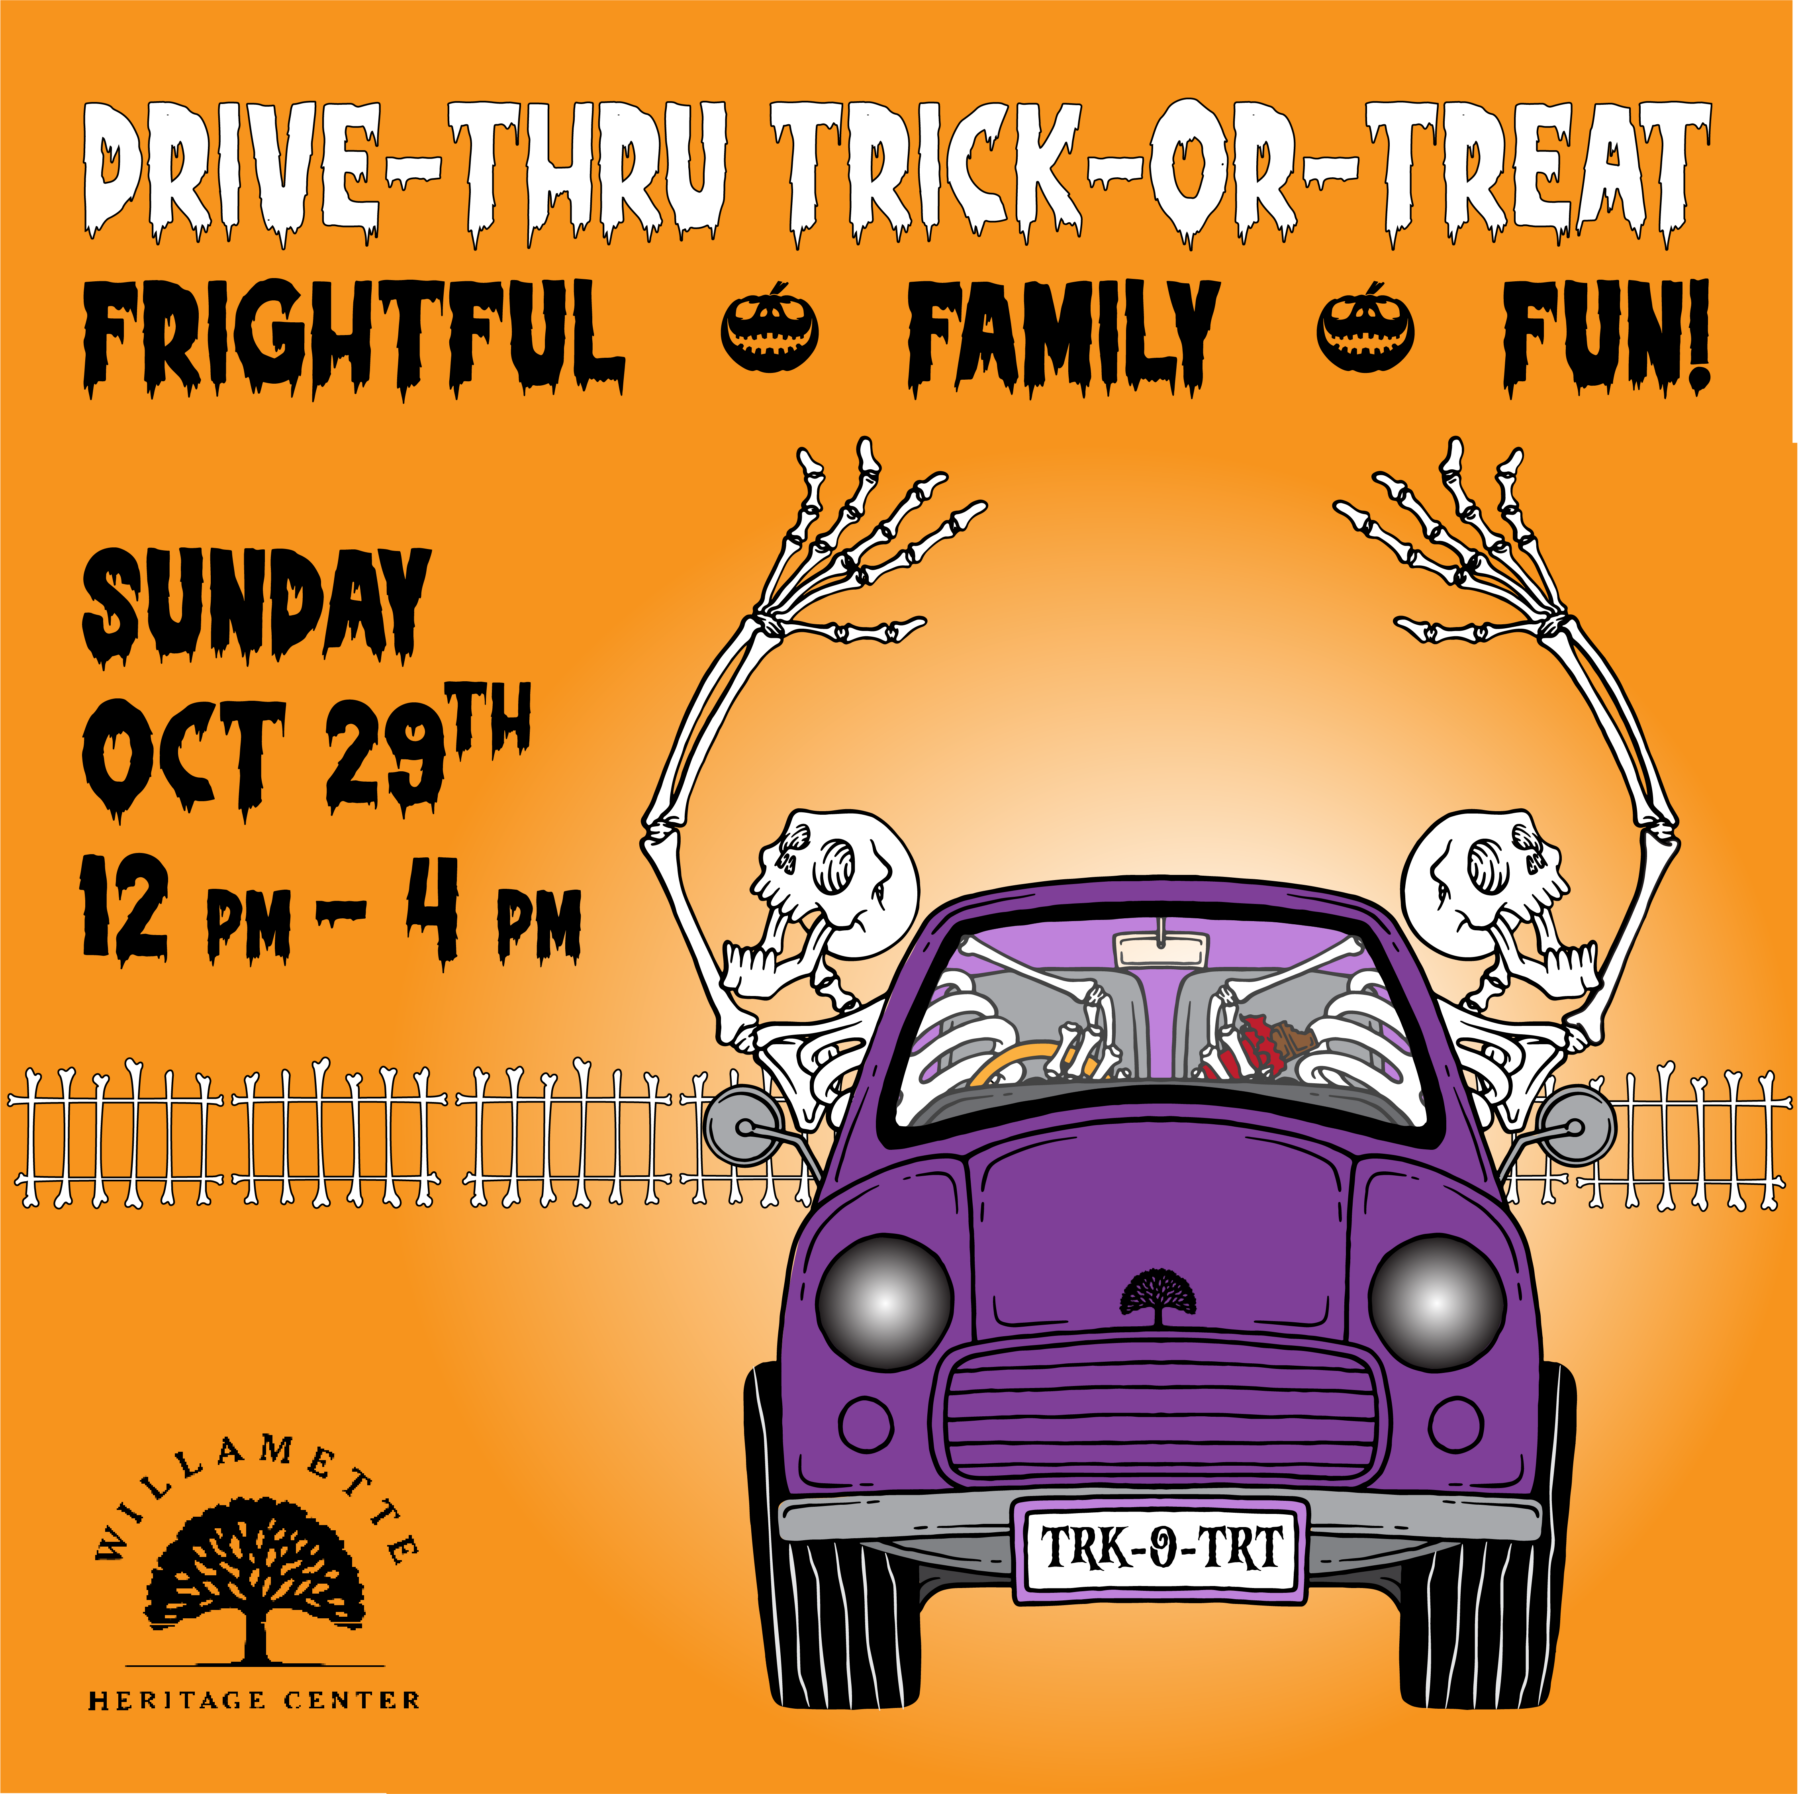 Drive Thru Trick or Treat Frightful Family Fun image of skeletons driving away from fence of graveyard